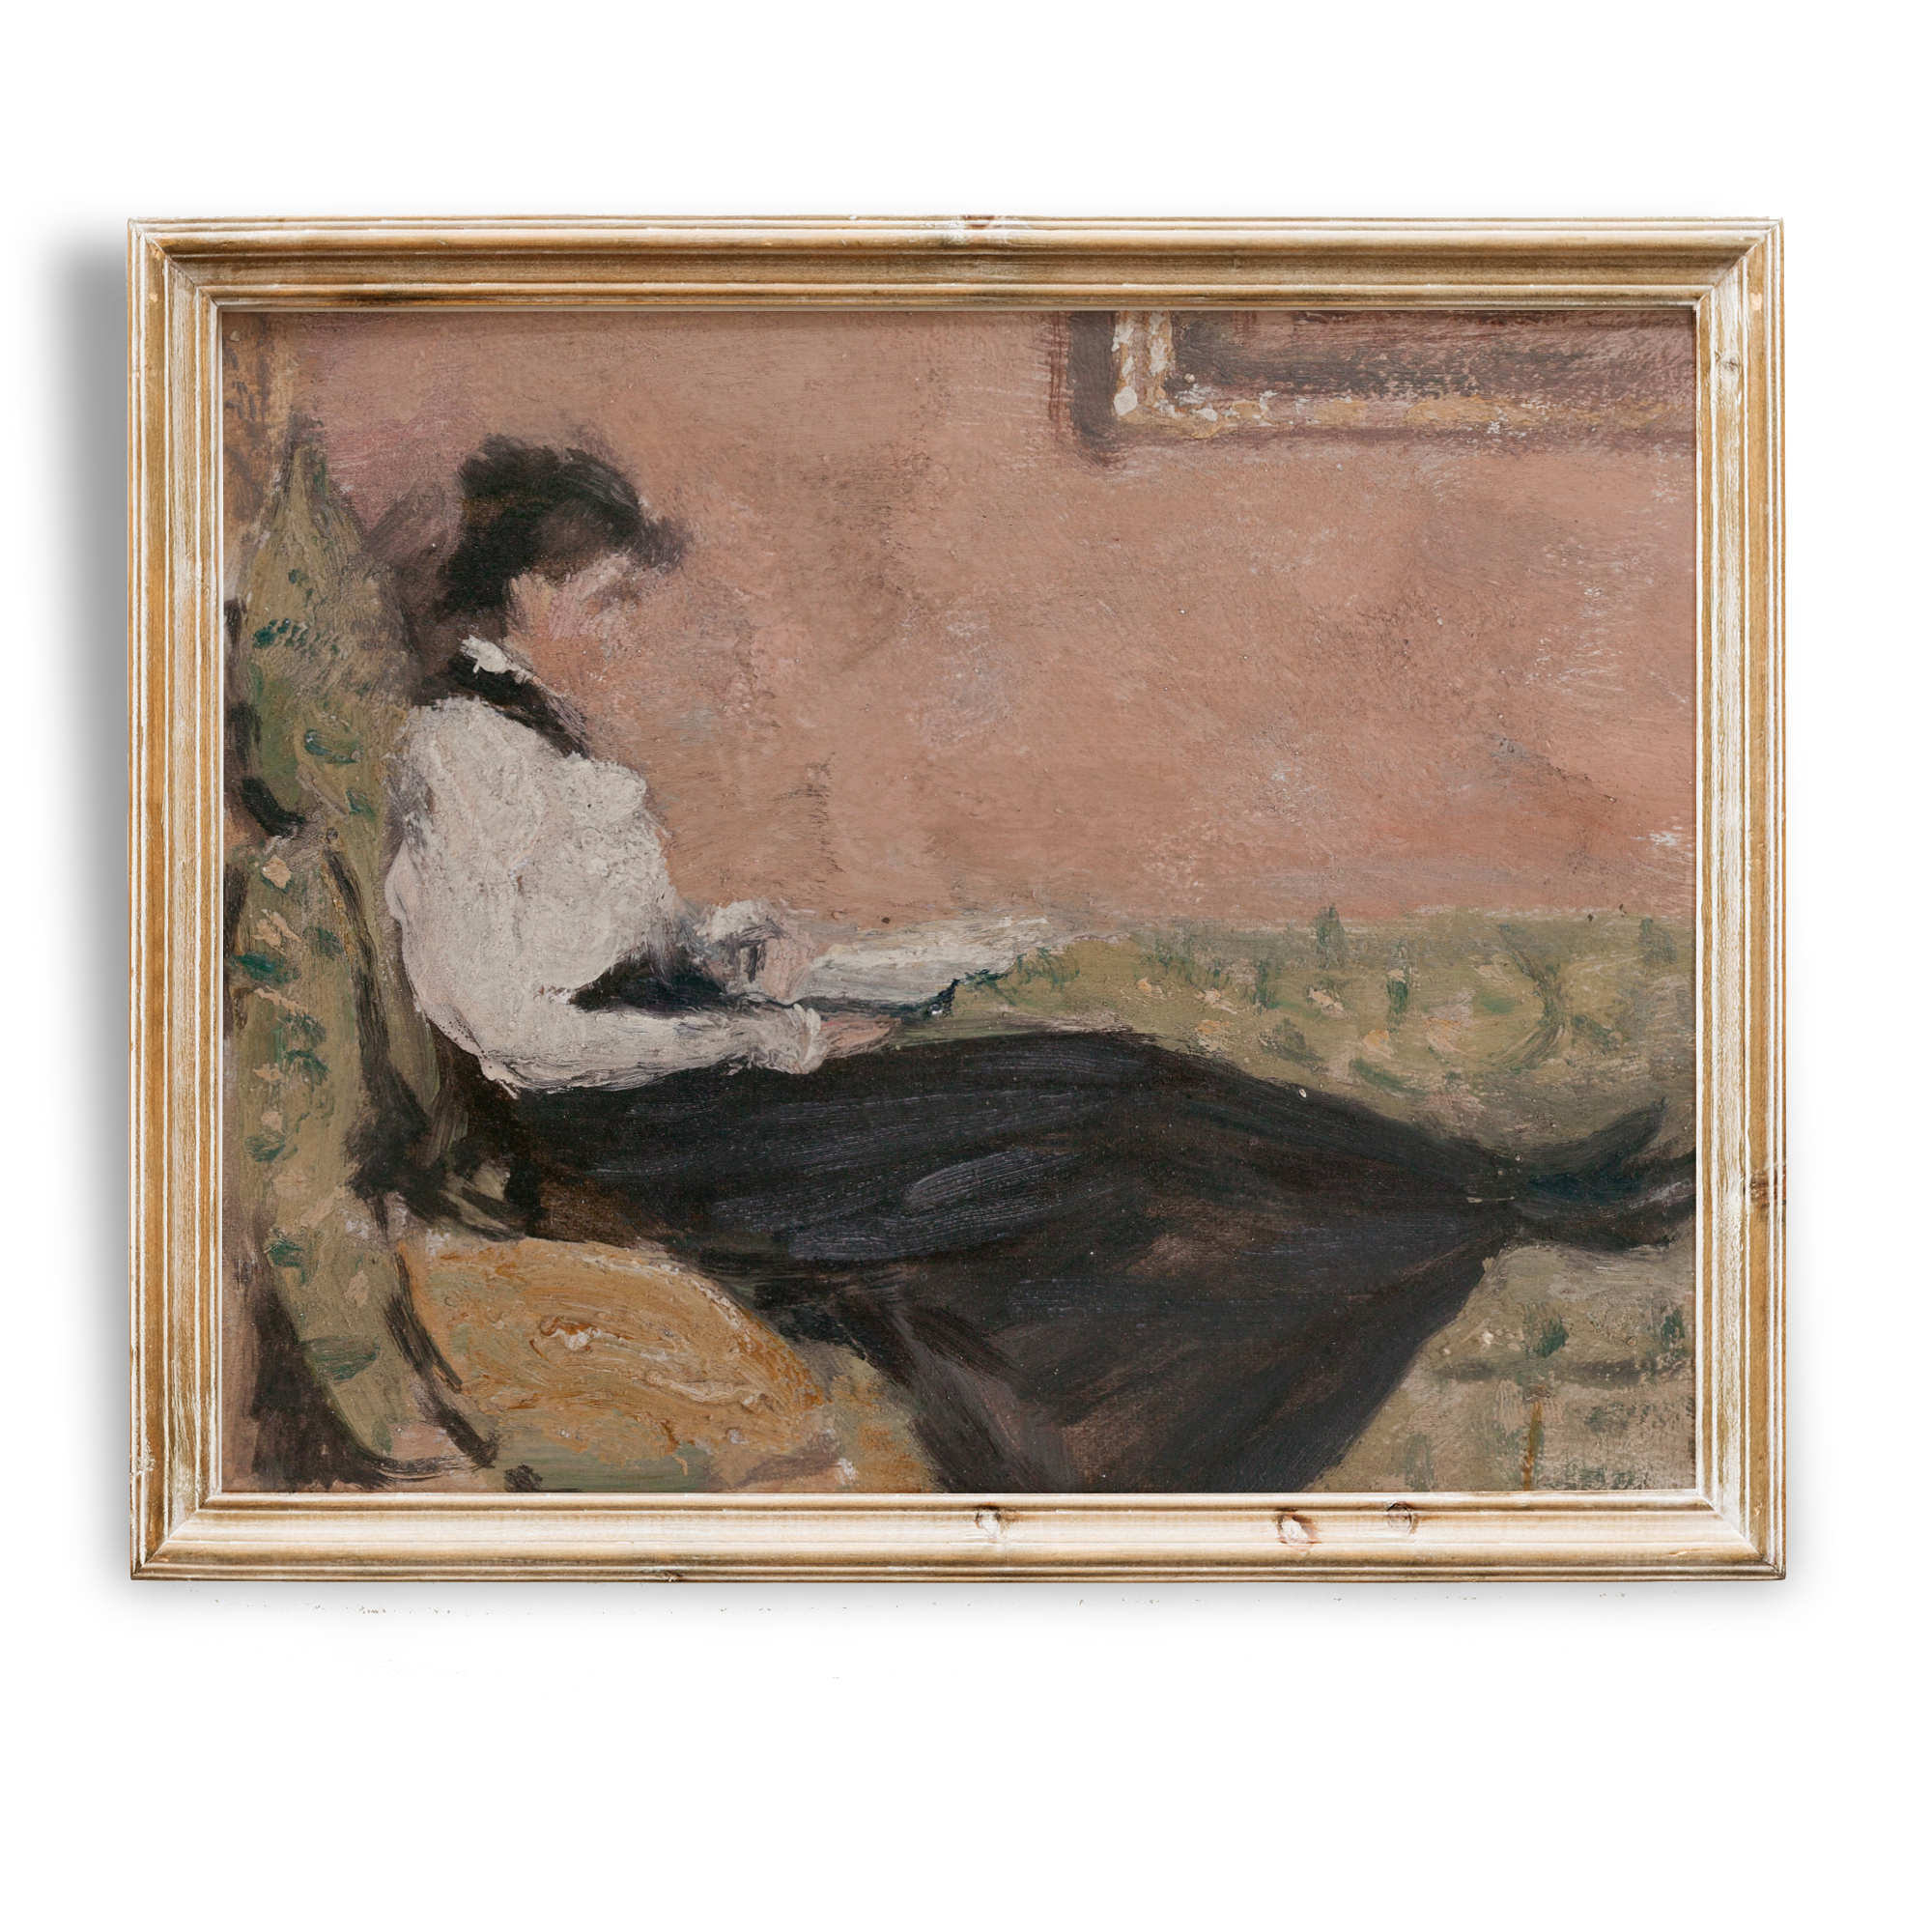 Woman Book Reading Painting Library Wall Art